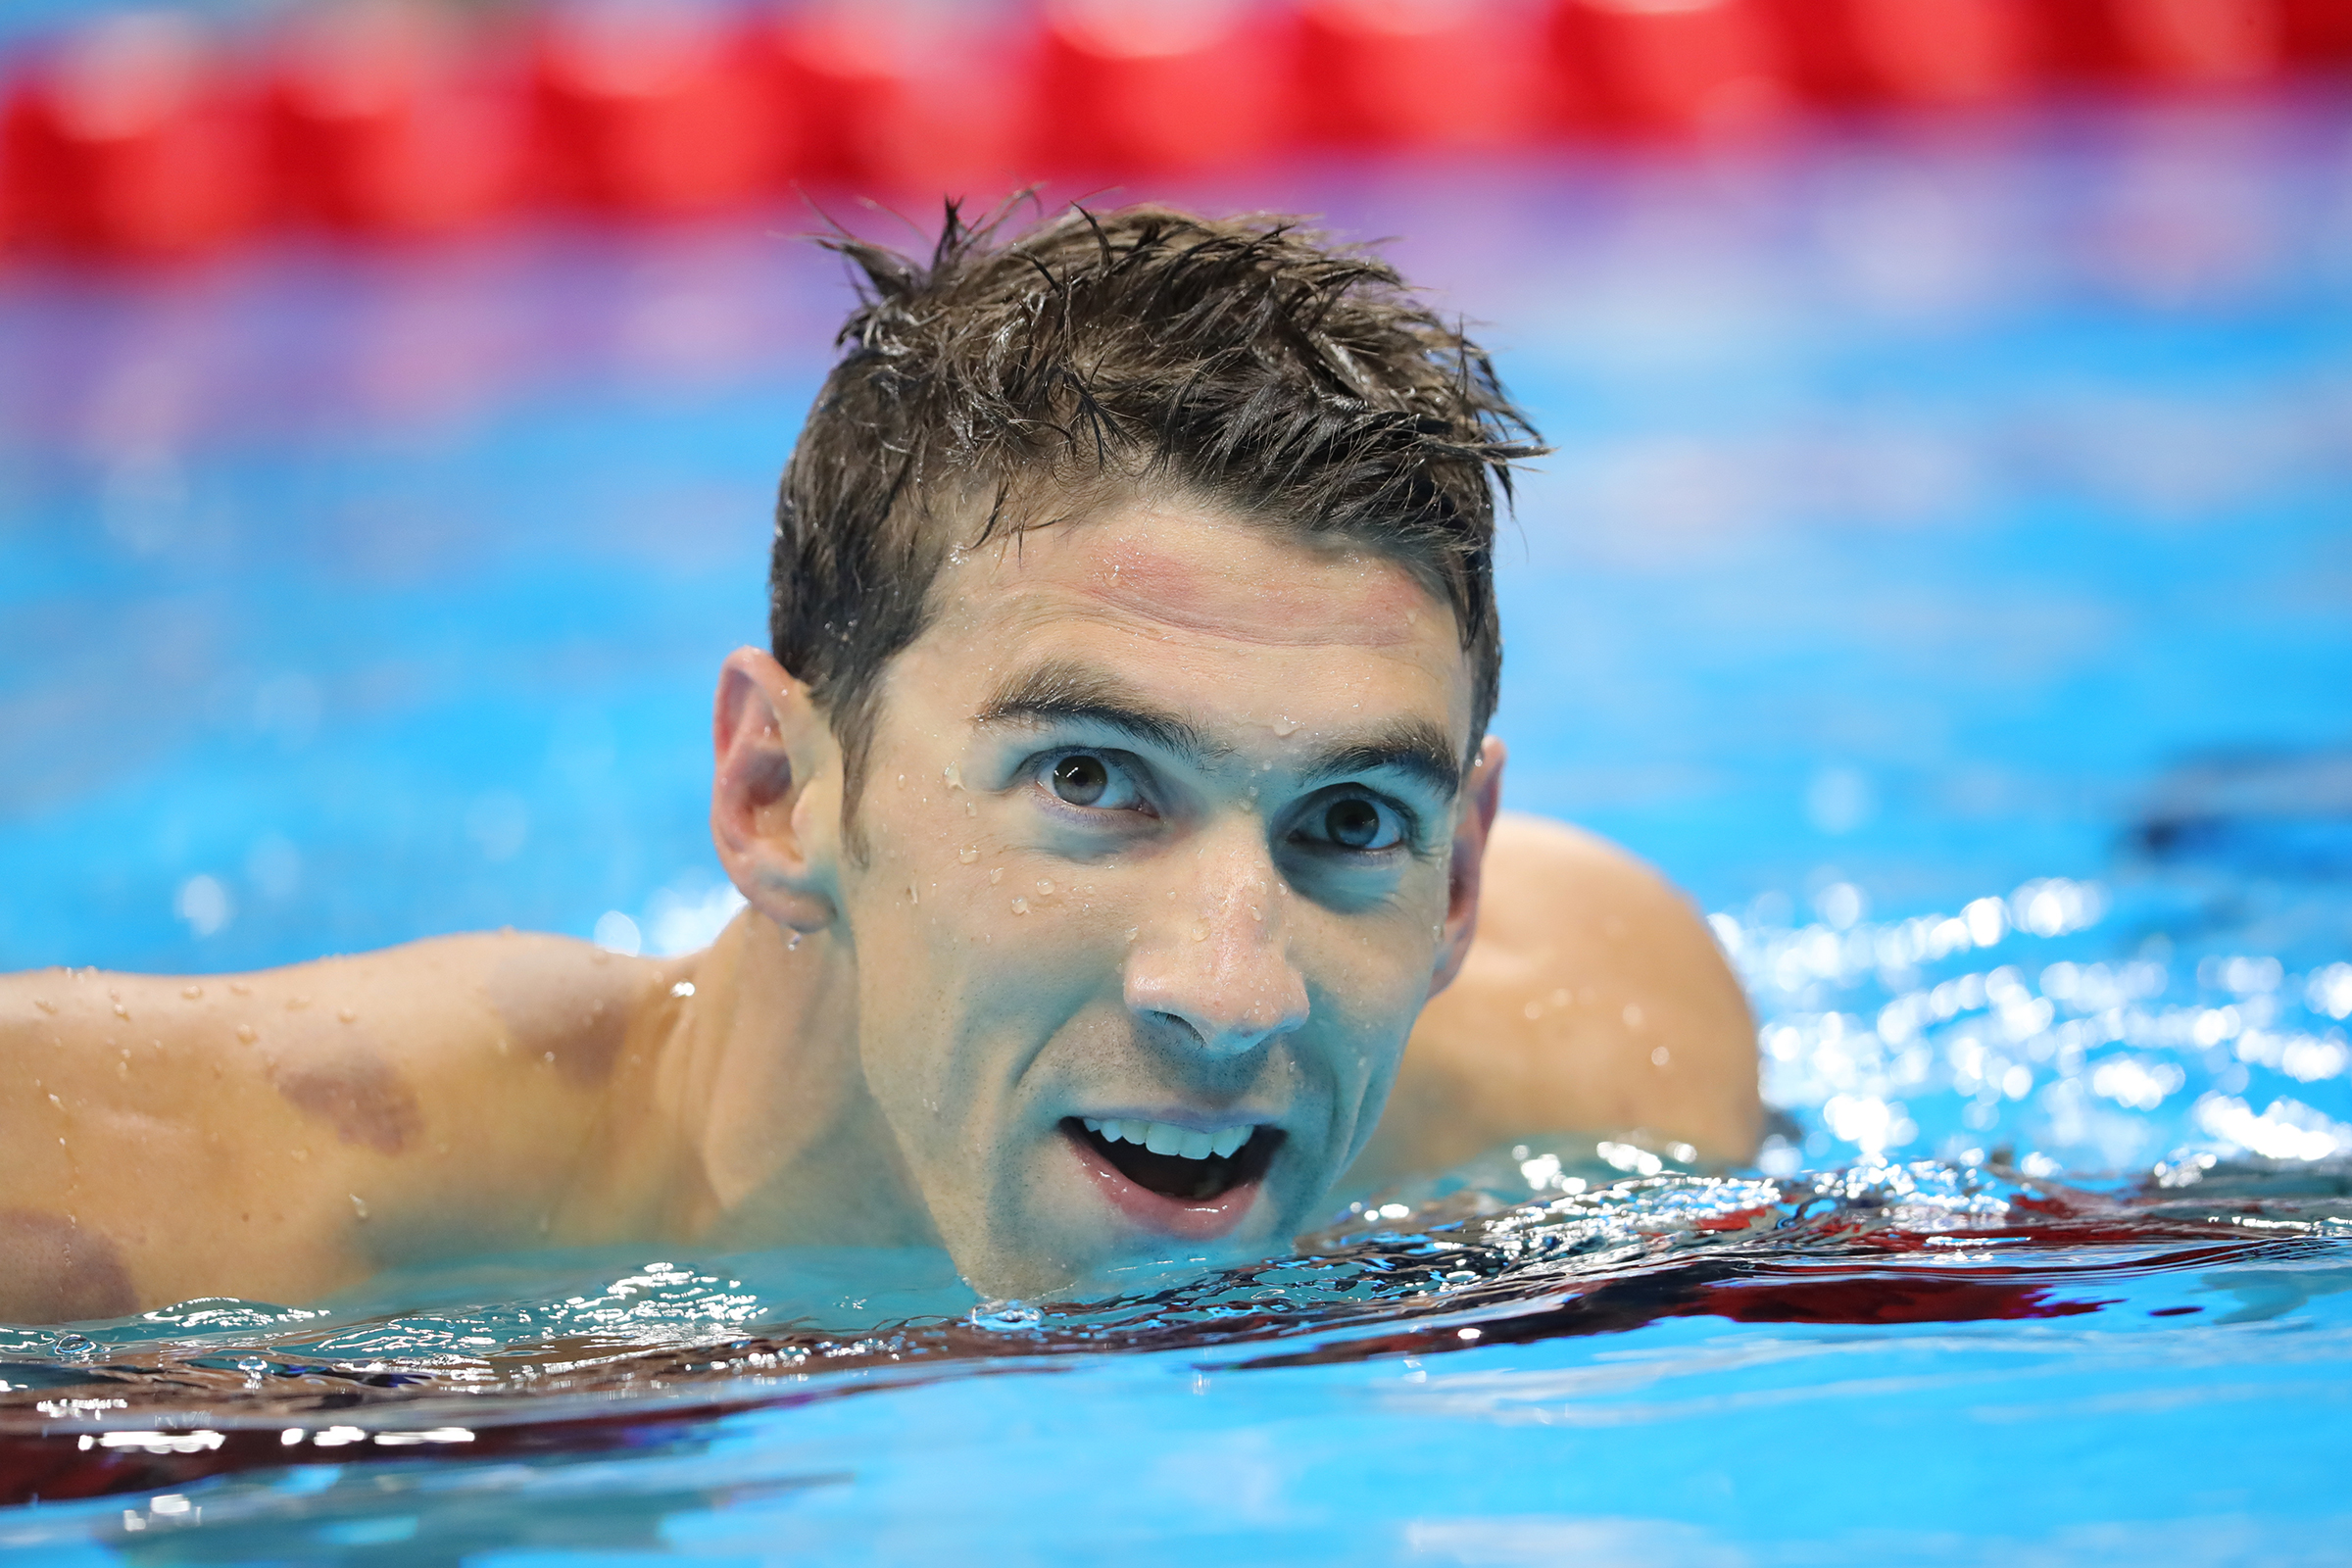 Michael Phelps of the USA reacts after the Men's 200m Individual Medley Semifinal of the Swimming events of the Rio 2016 Olympic Games at the Olympic Aquatics Stadium in Rio de Janeiro, Brazil, 10 August 2016. Photo: Michael Kappeler/dpa